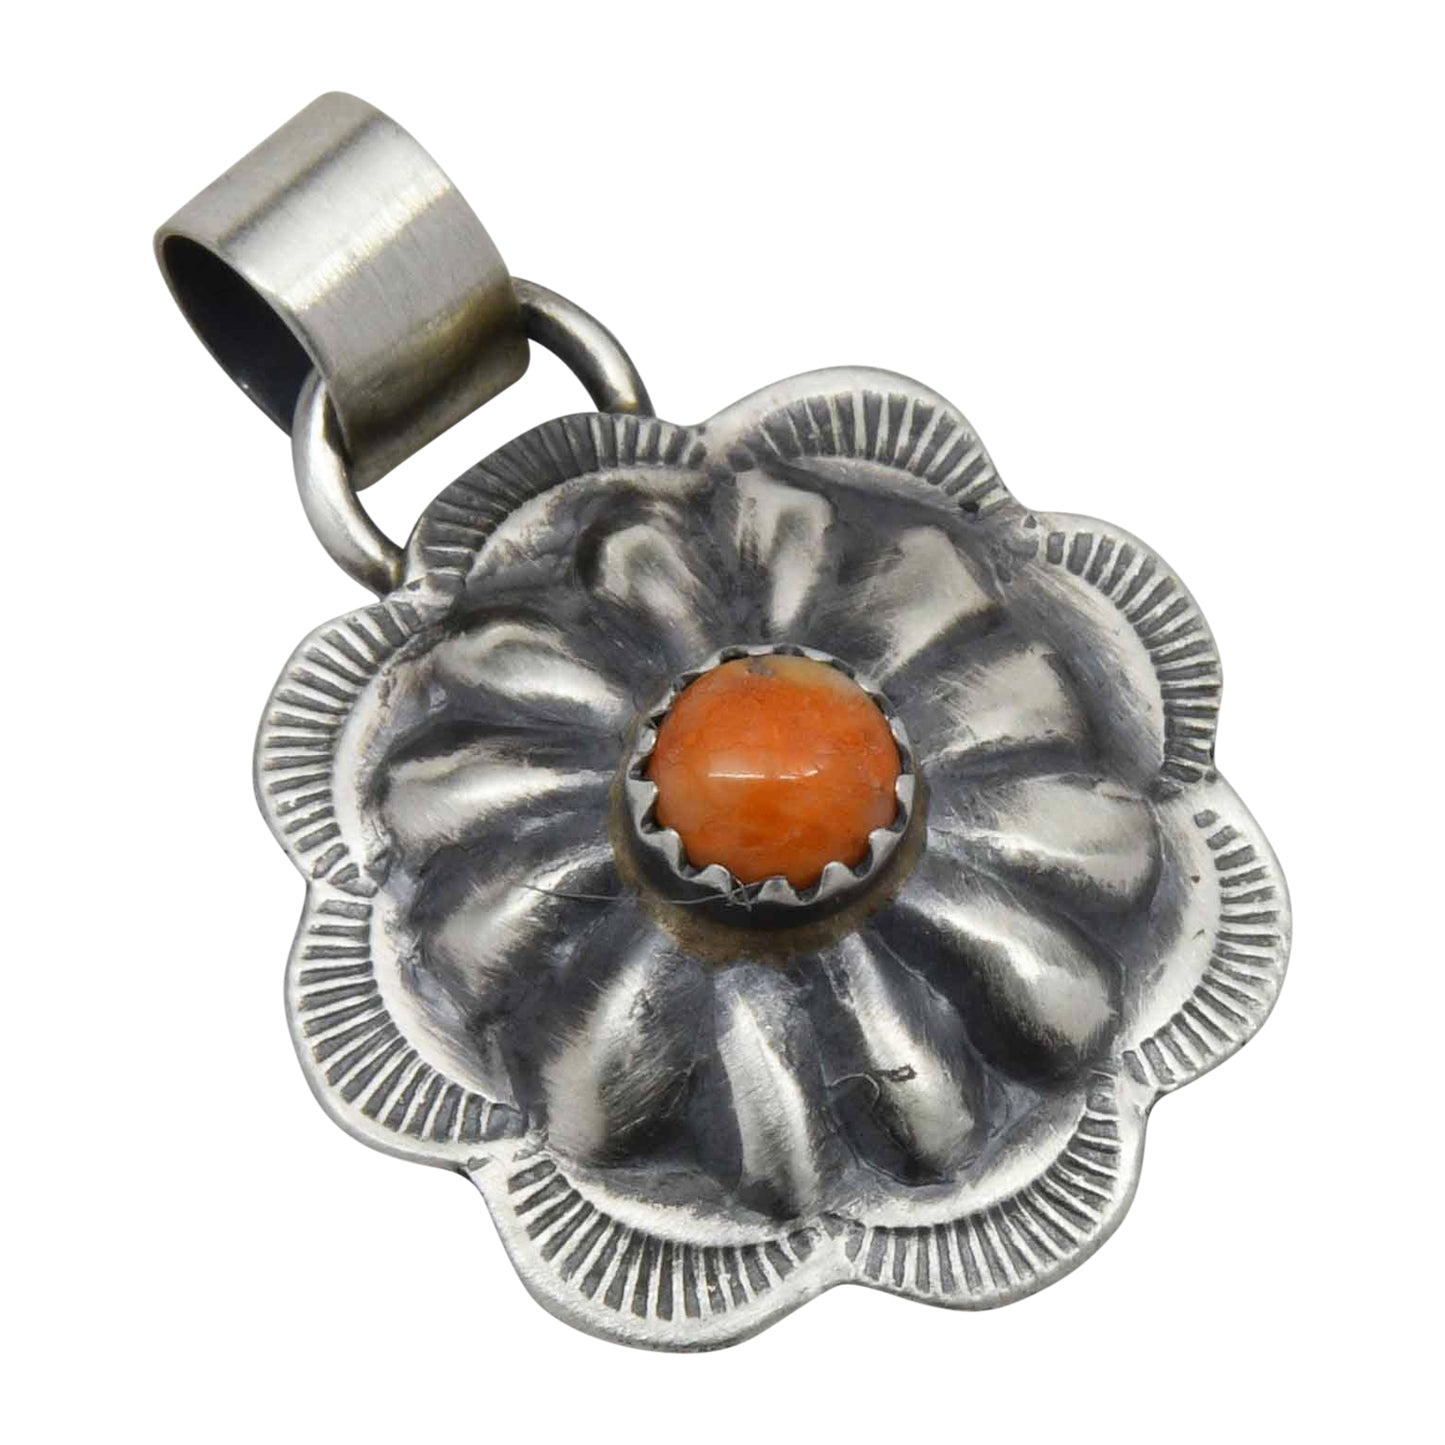 Ryan & Joan Begay Small Orange Spiny Oyster Round Concho Pendant